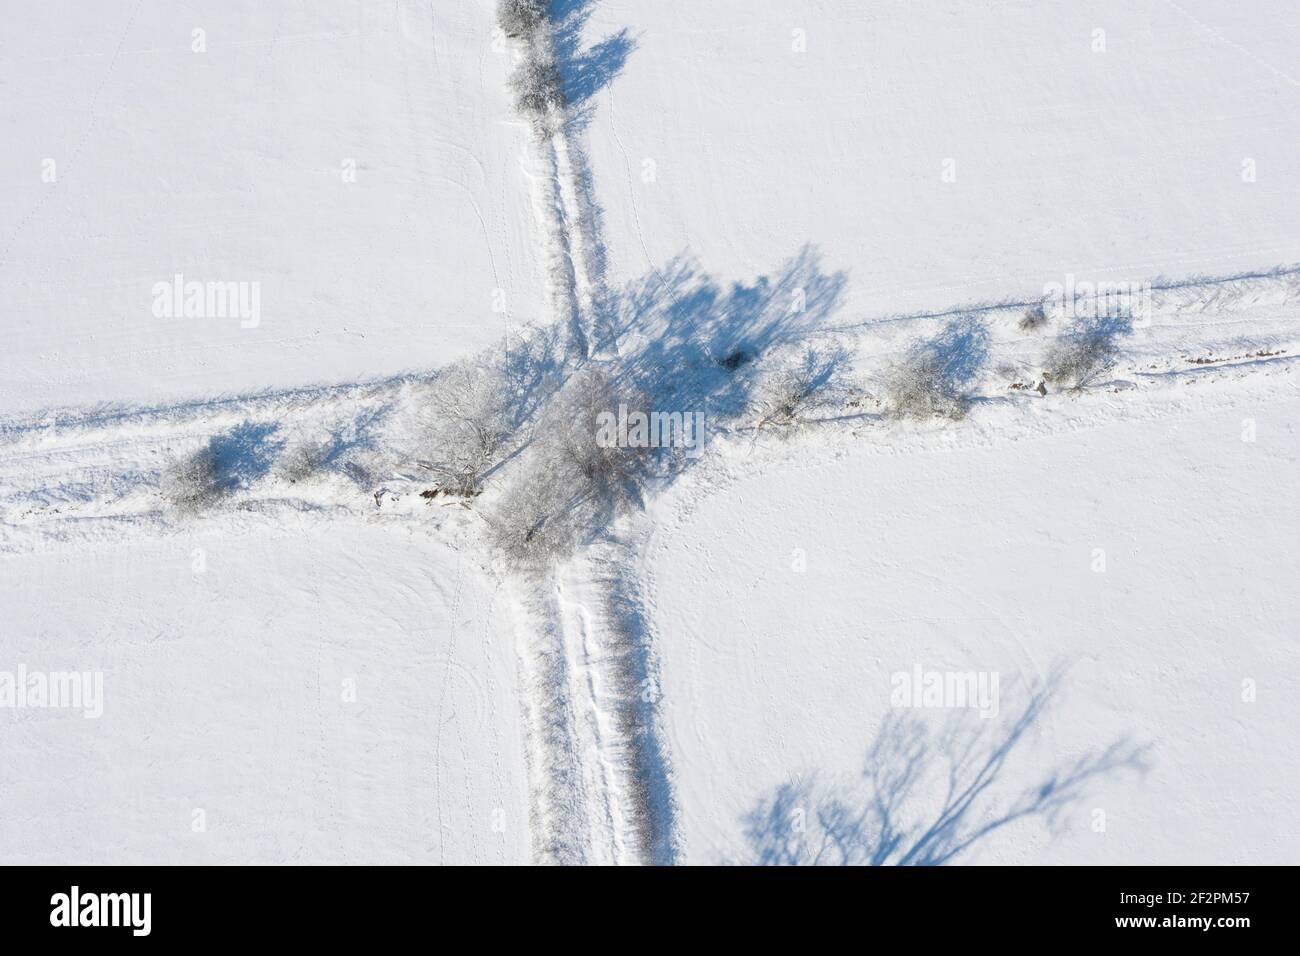 Snowy landscape with a fork in the road, all directions, symbol for life paths Stock Photo